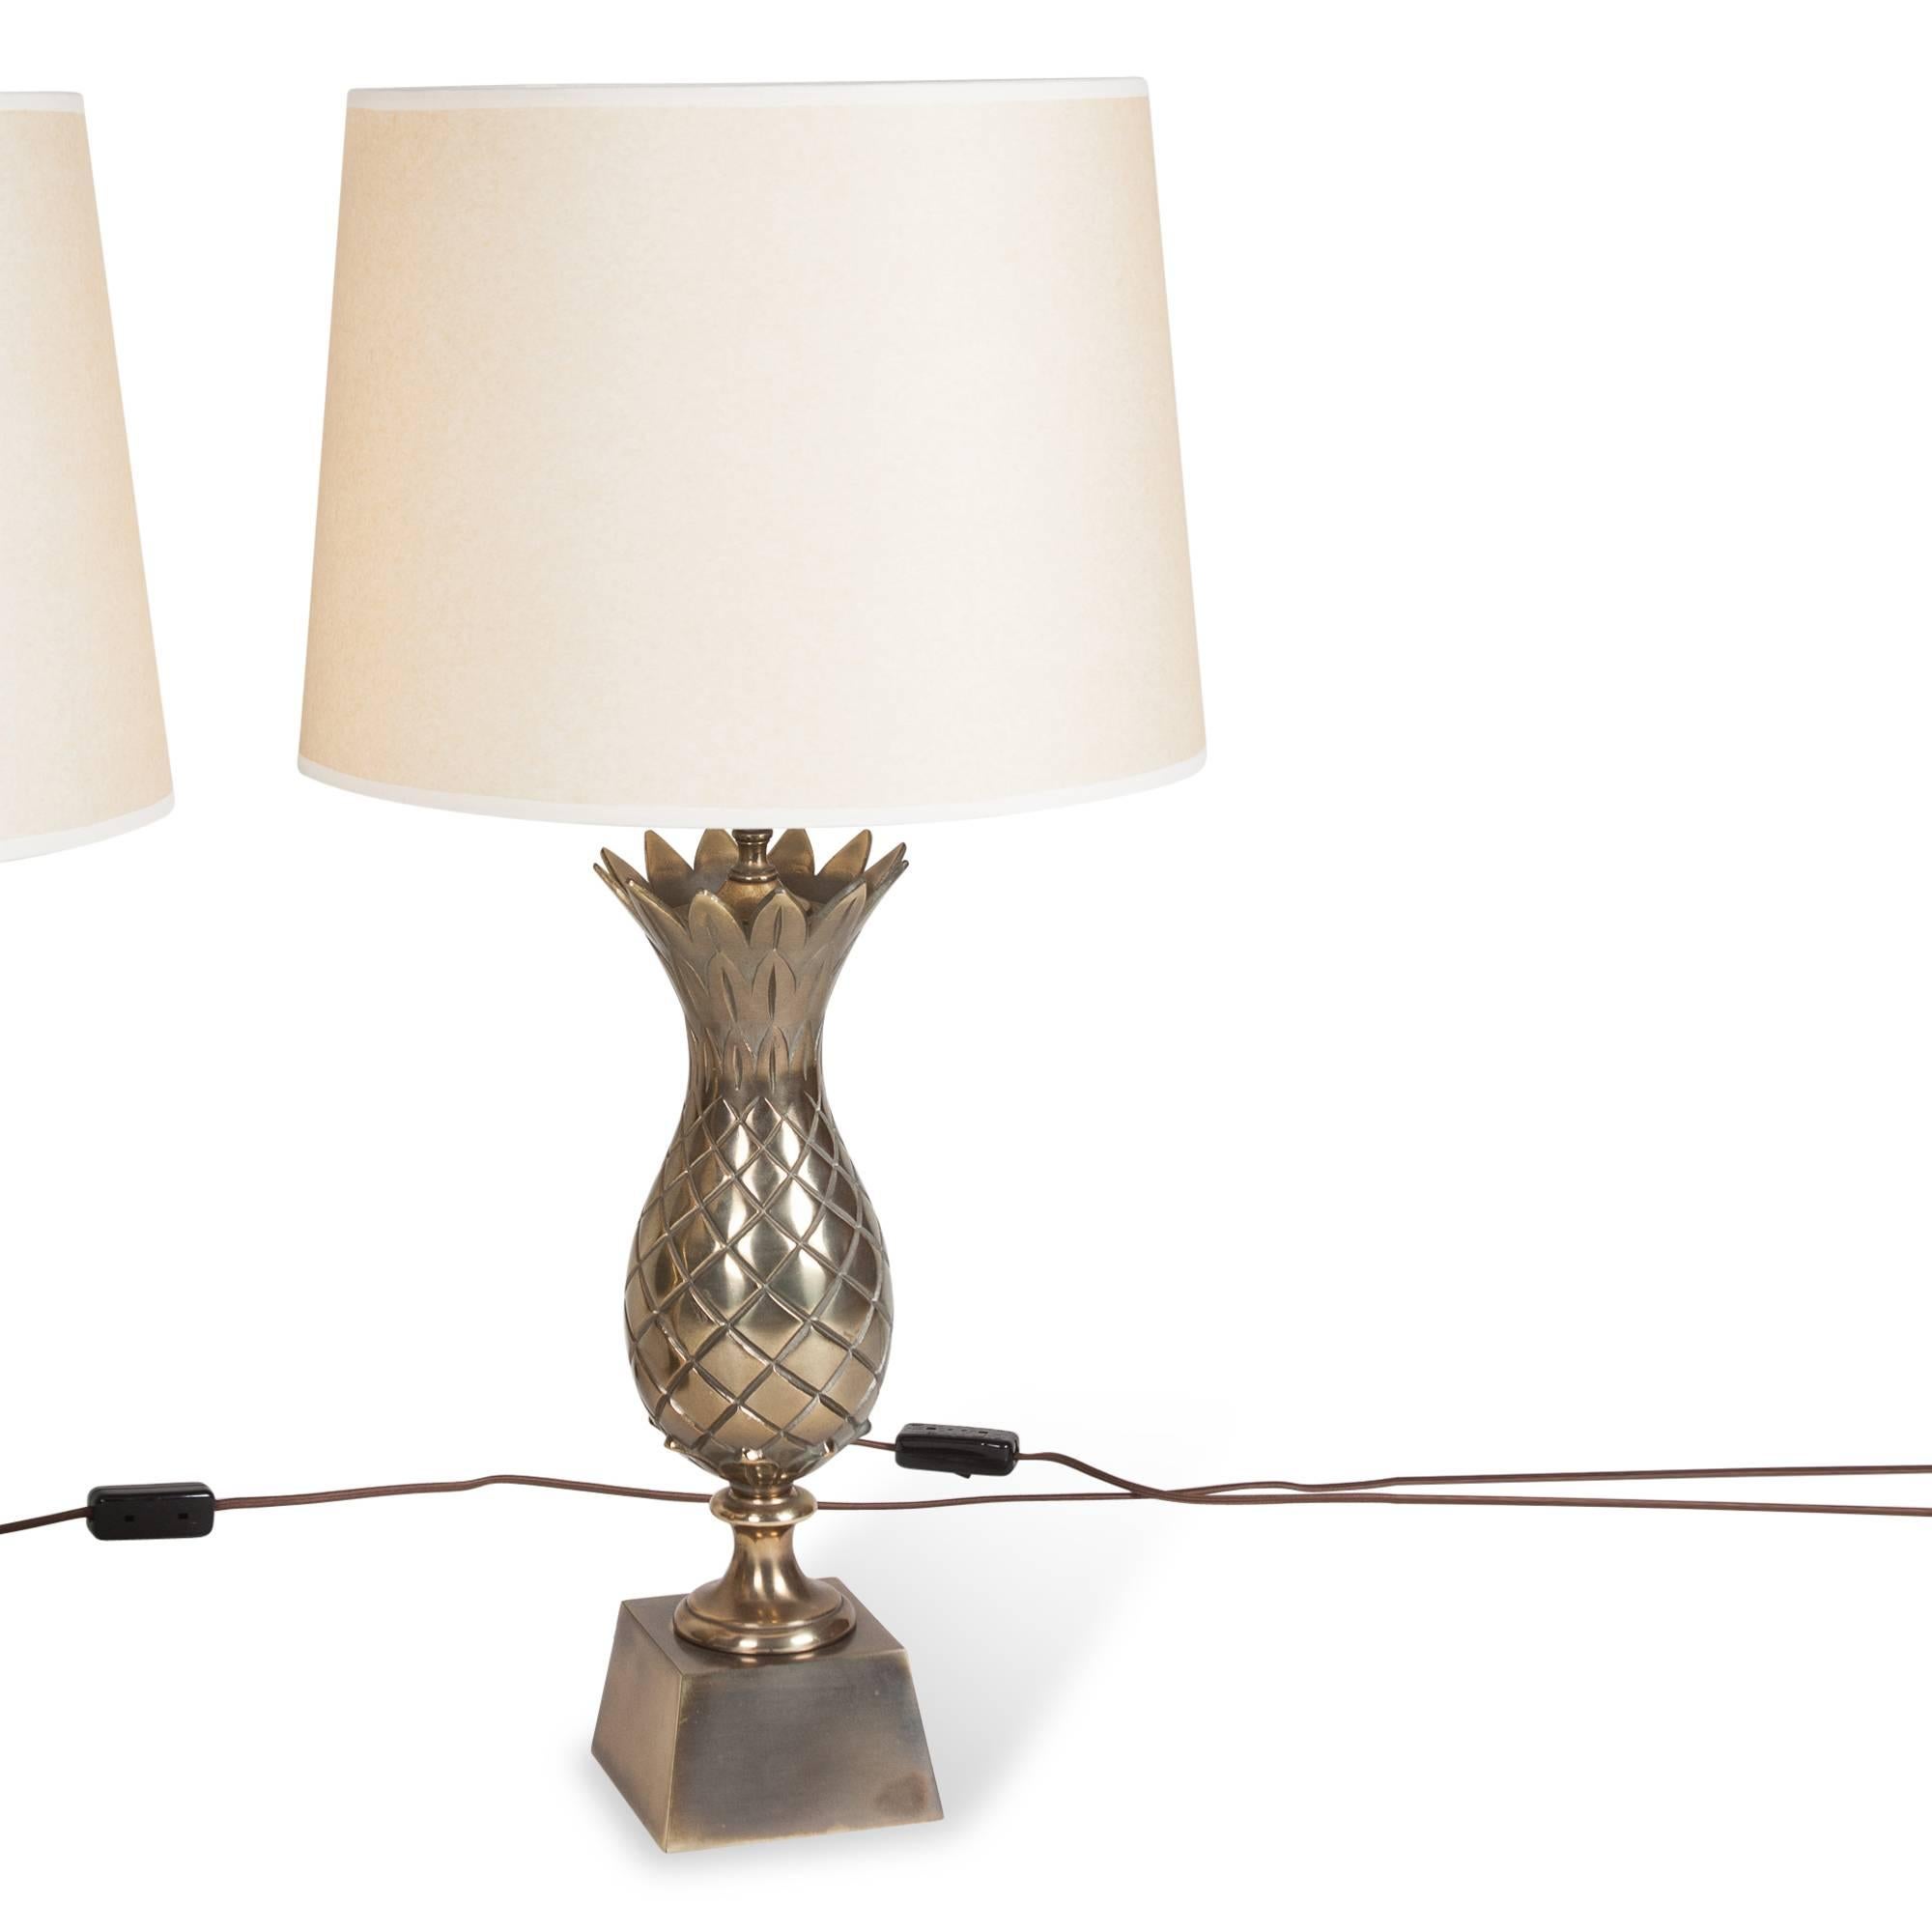 Pair of brass pineapple form lamps, the pineapple having saw tooth top border, on square tapered brass base, American 1960s. In custom linen shades. Overall height 29 1/2 in, base measures 5 in square. Shade measures top diameter 13 in, bottom